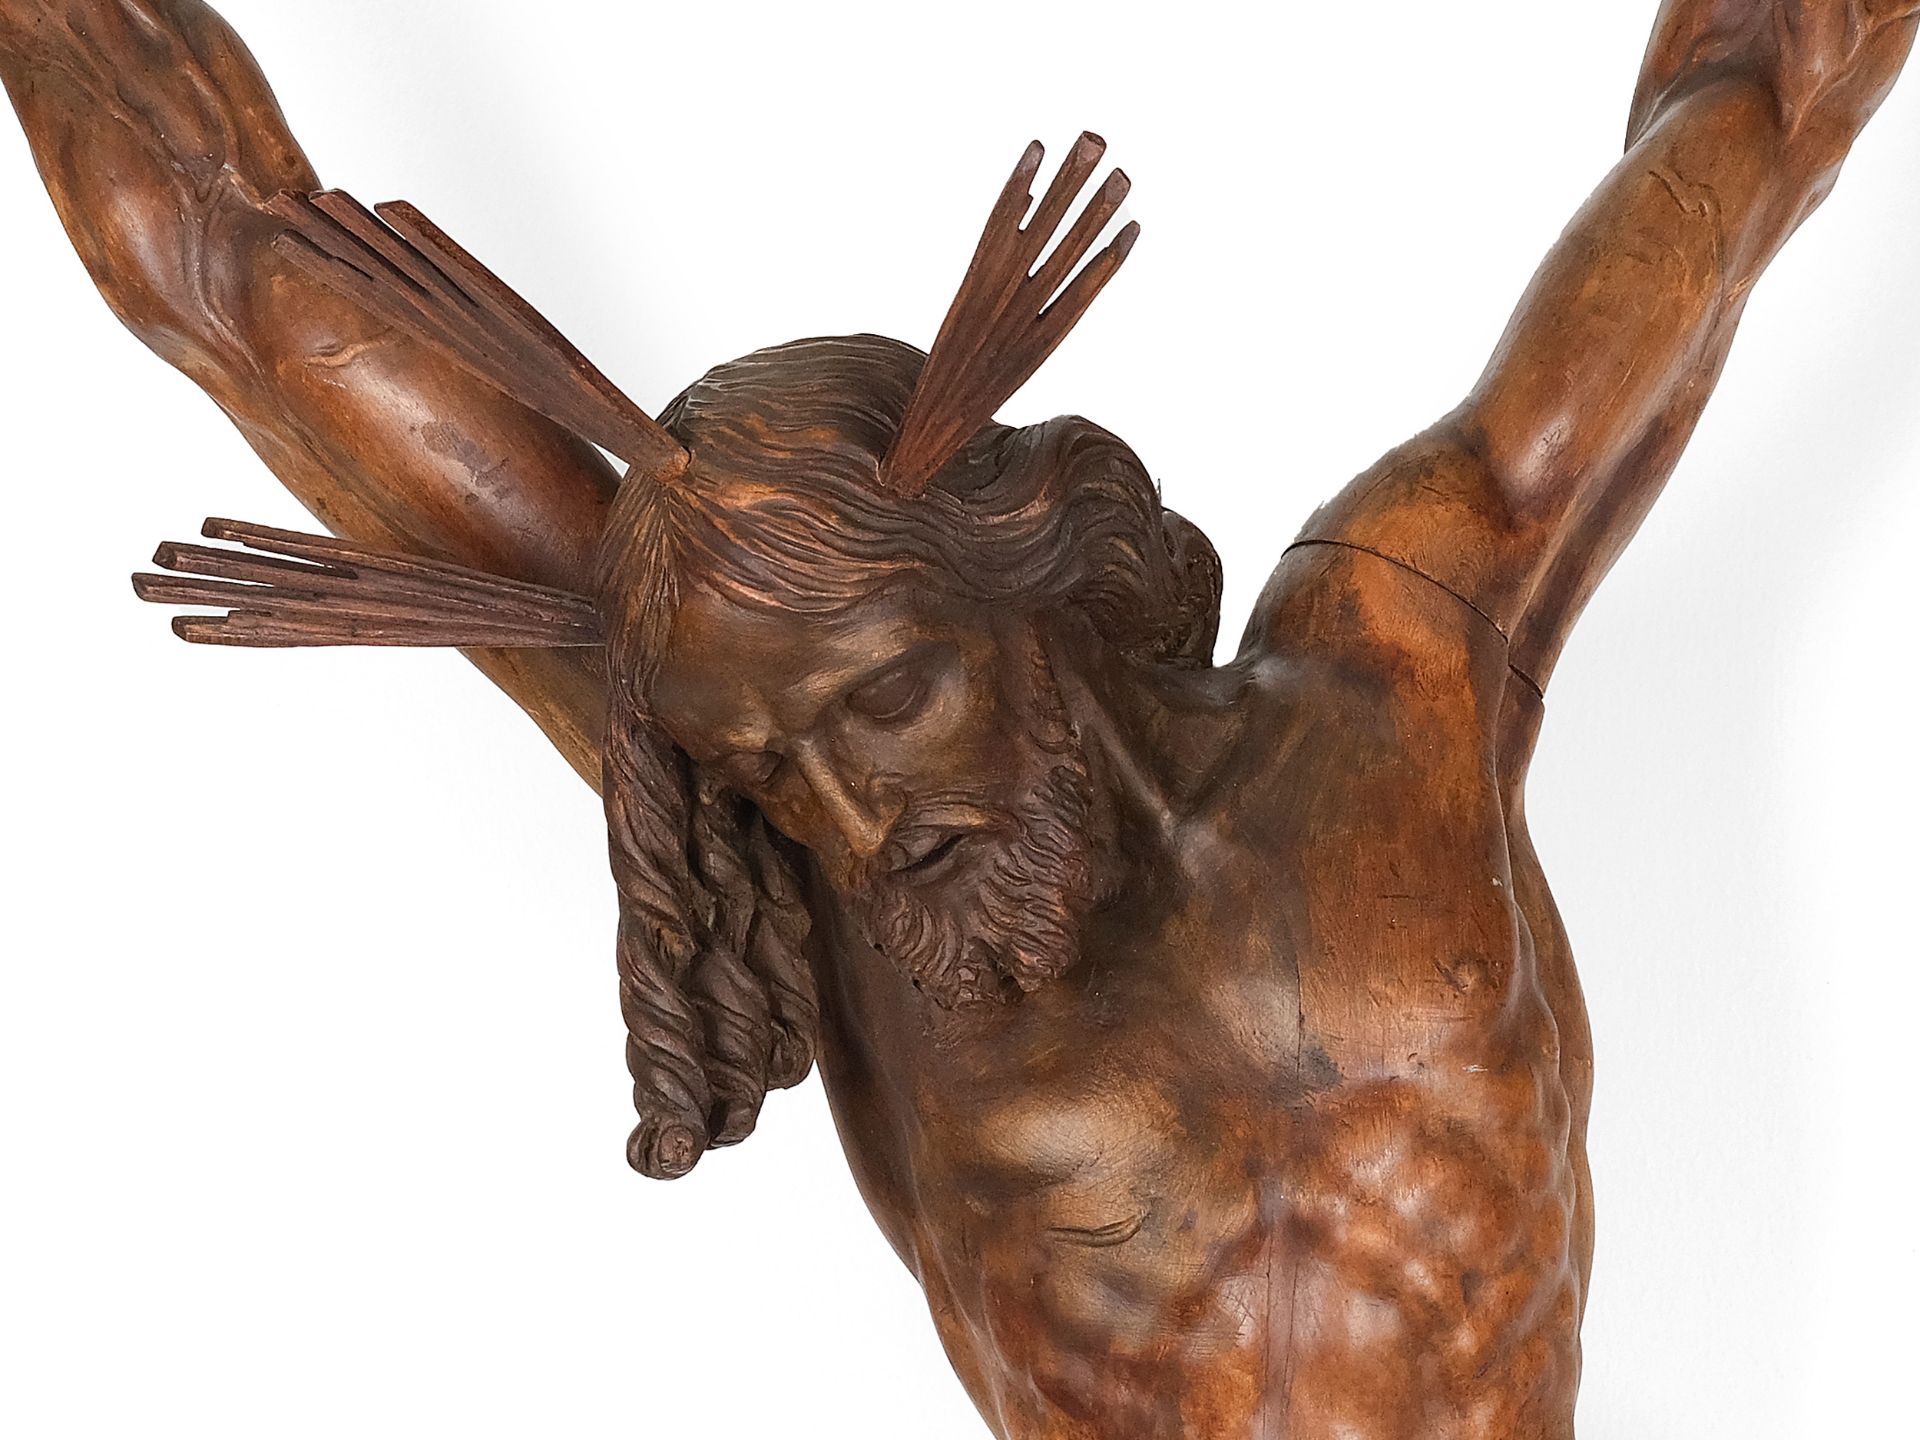 Christ with cross nimbus, In the style of the 17th/18th century, Carved lime wood - Image 2 of 3